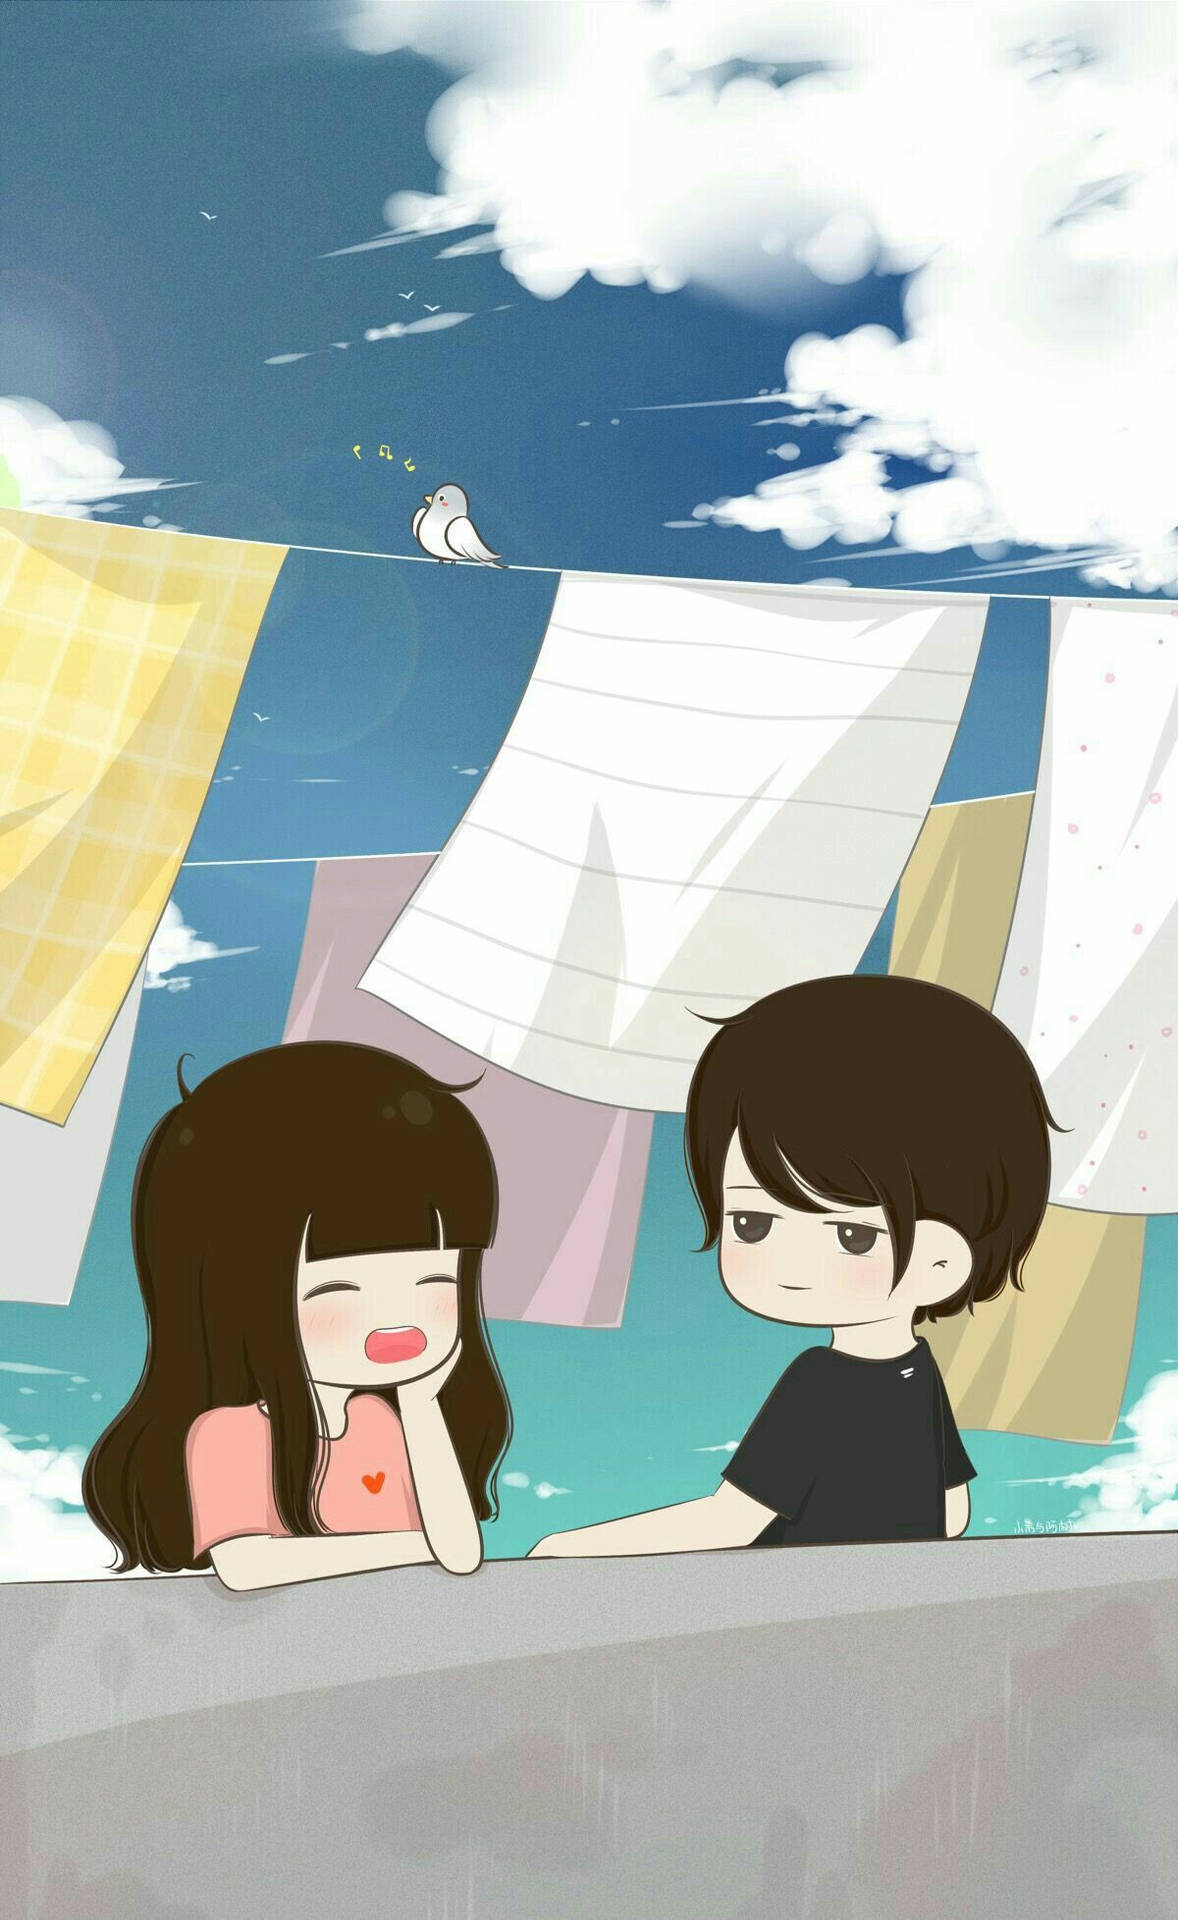 Love Cartoon Laundry Picture